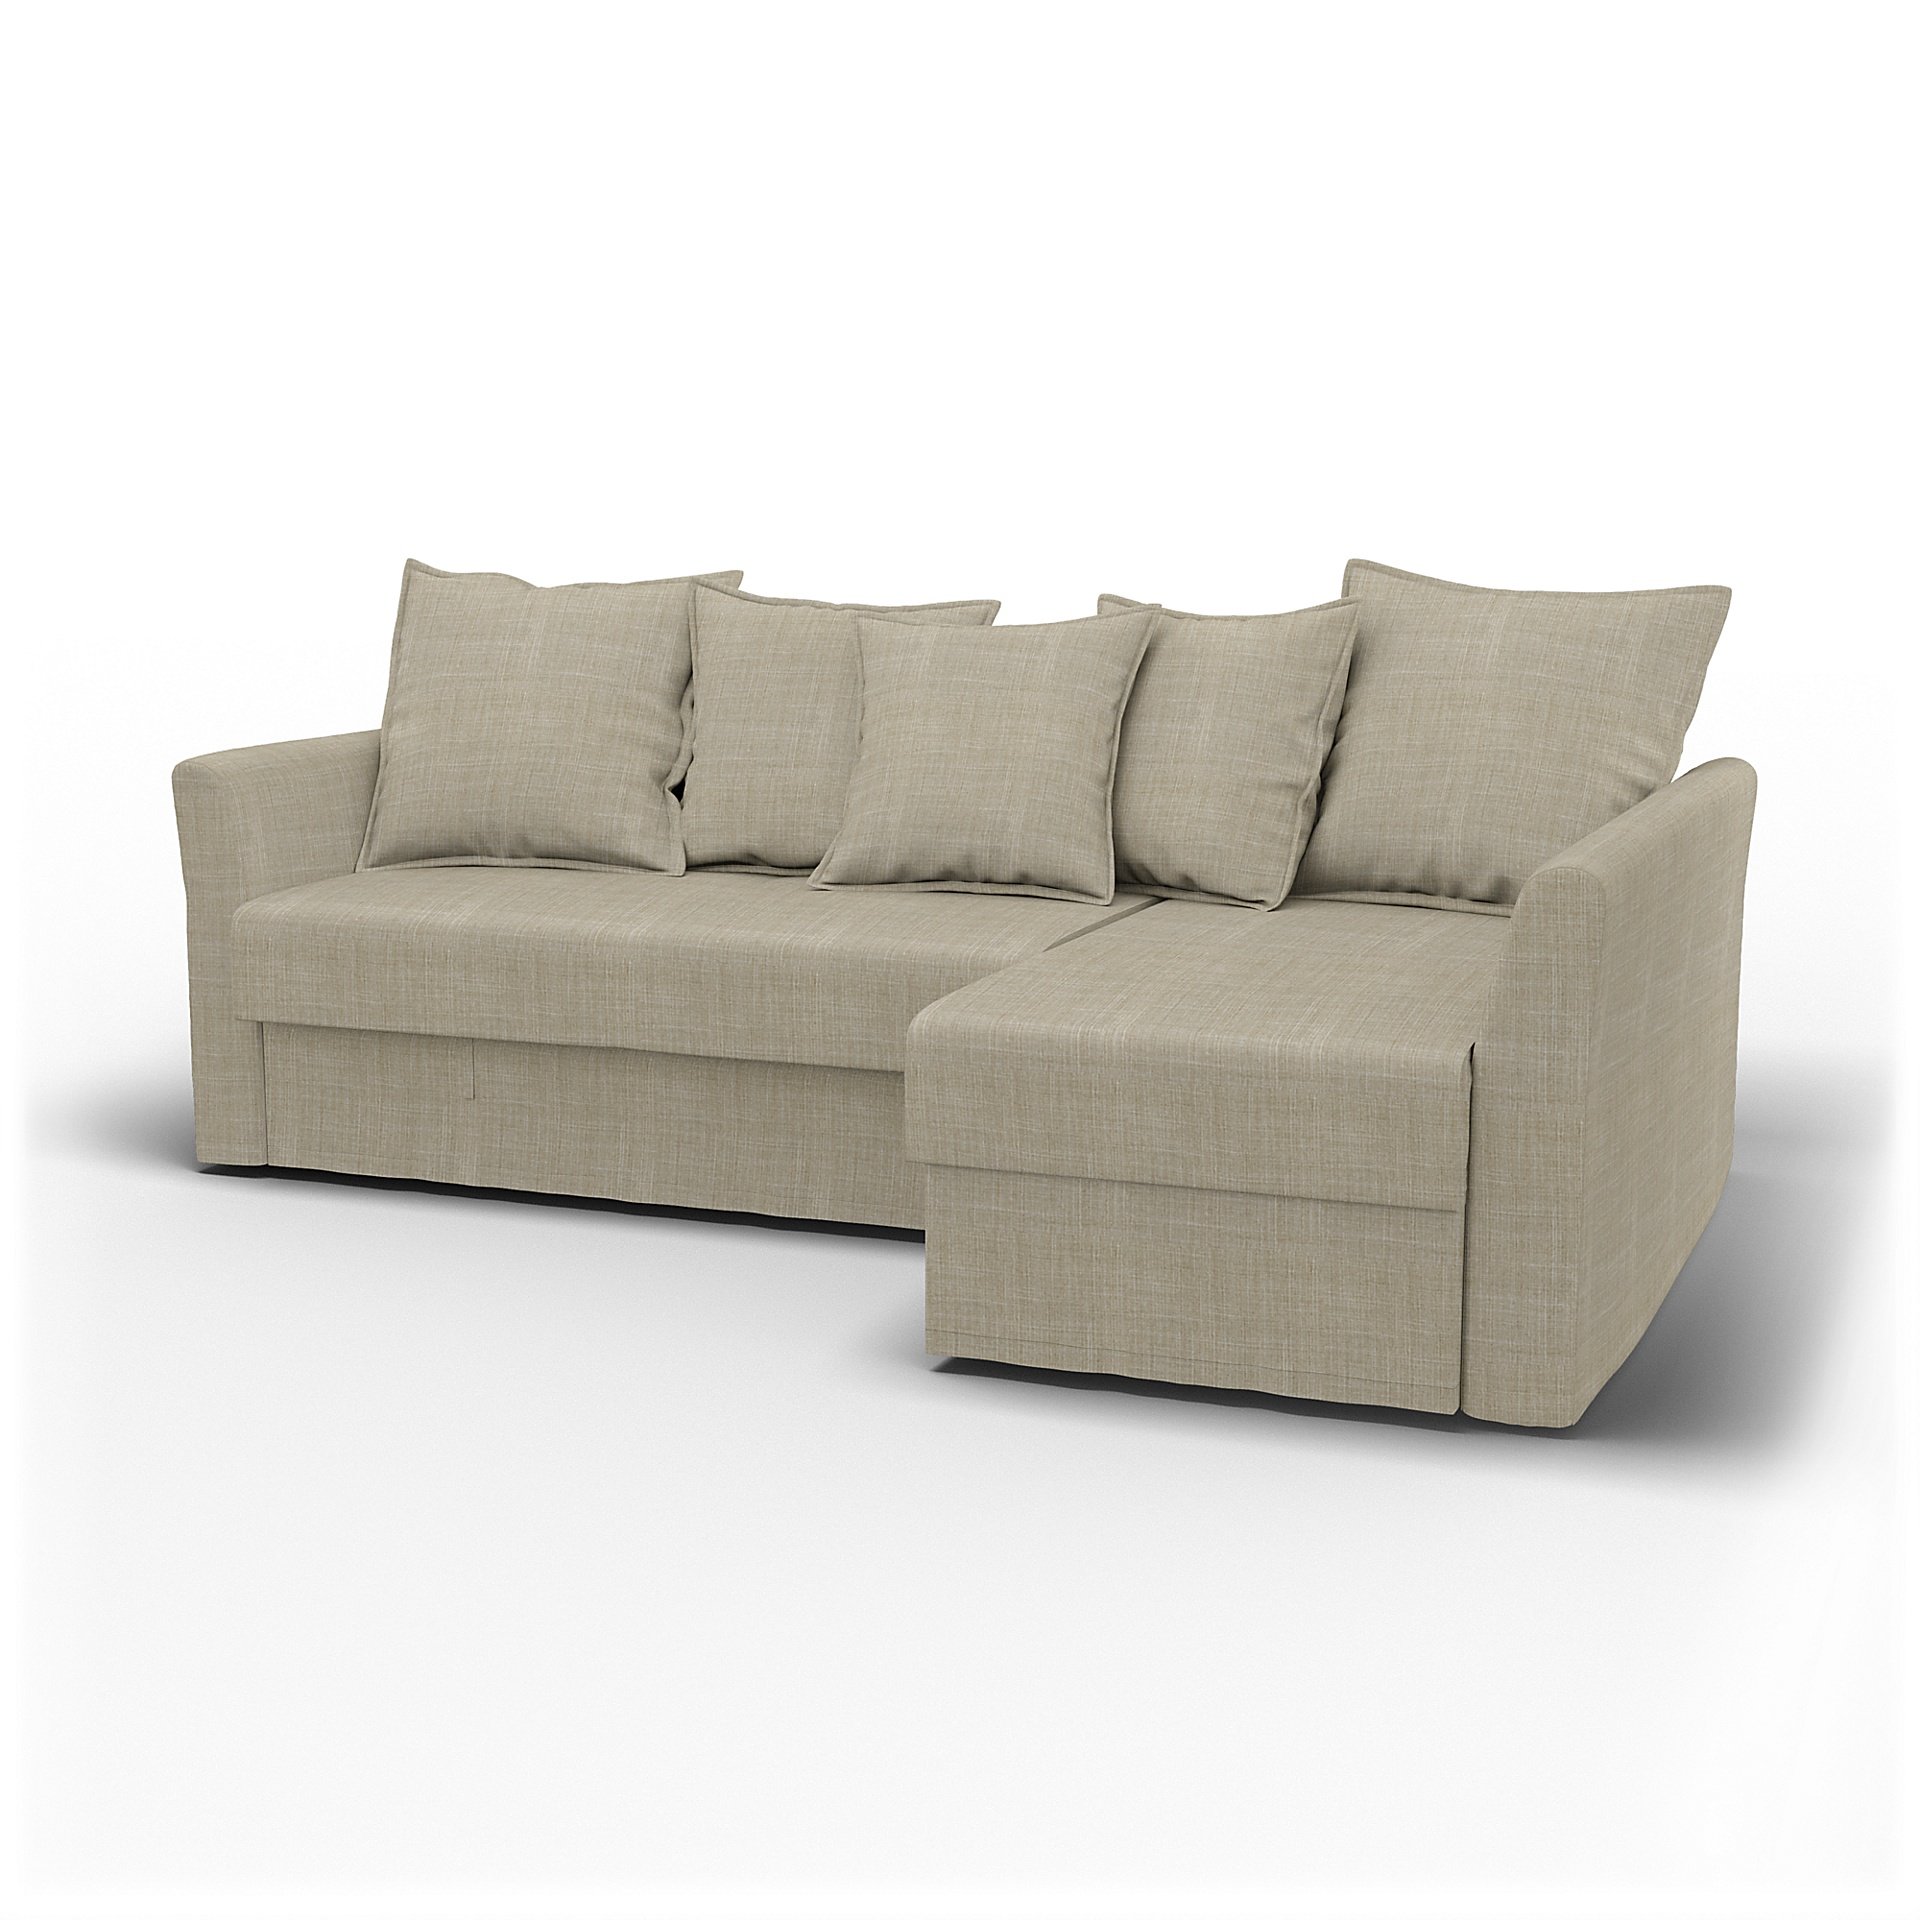 IKEA - Holmsund Sofabed with Chaiselongue, Sand Beige, Boucle & Texture - Bemz